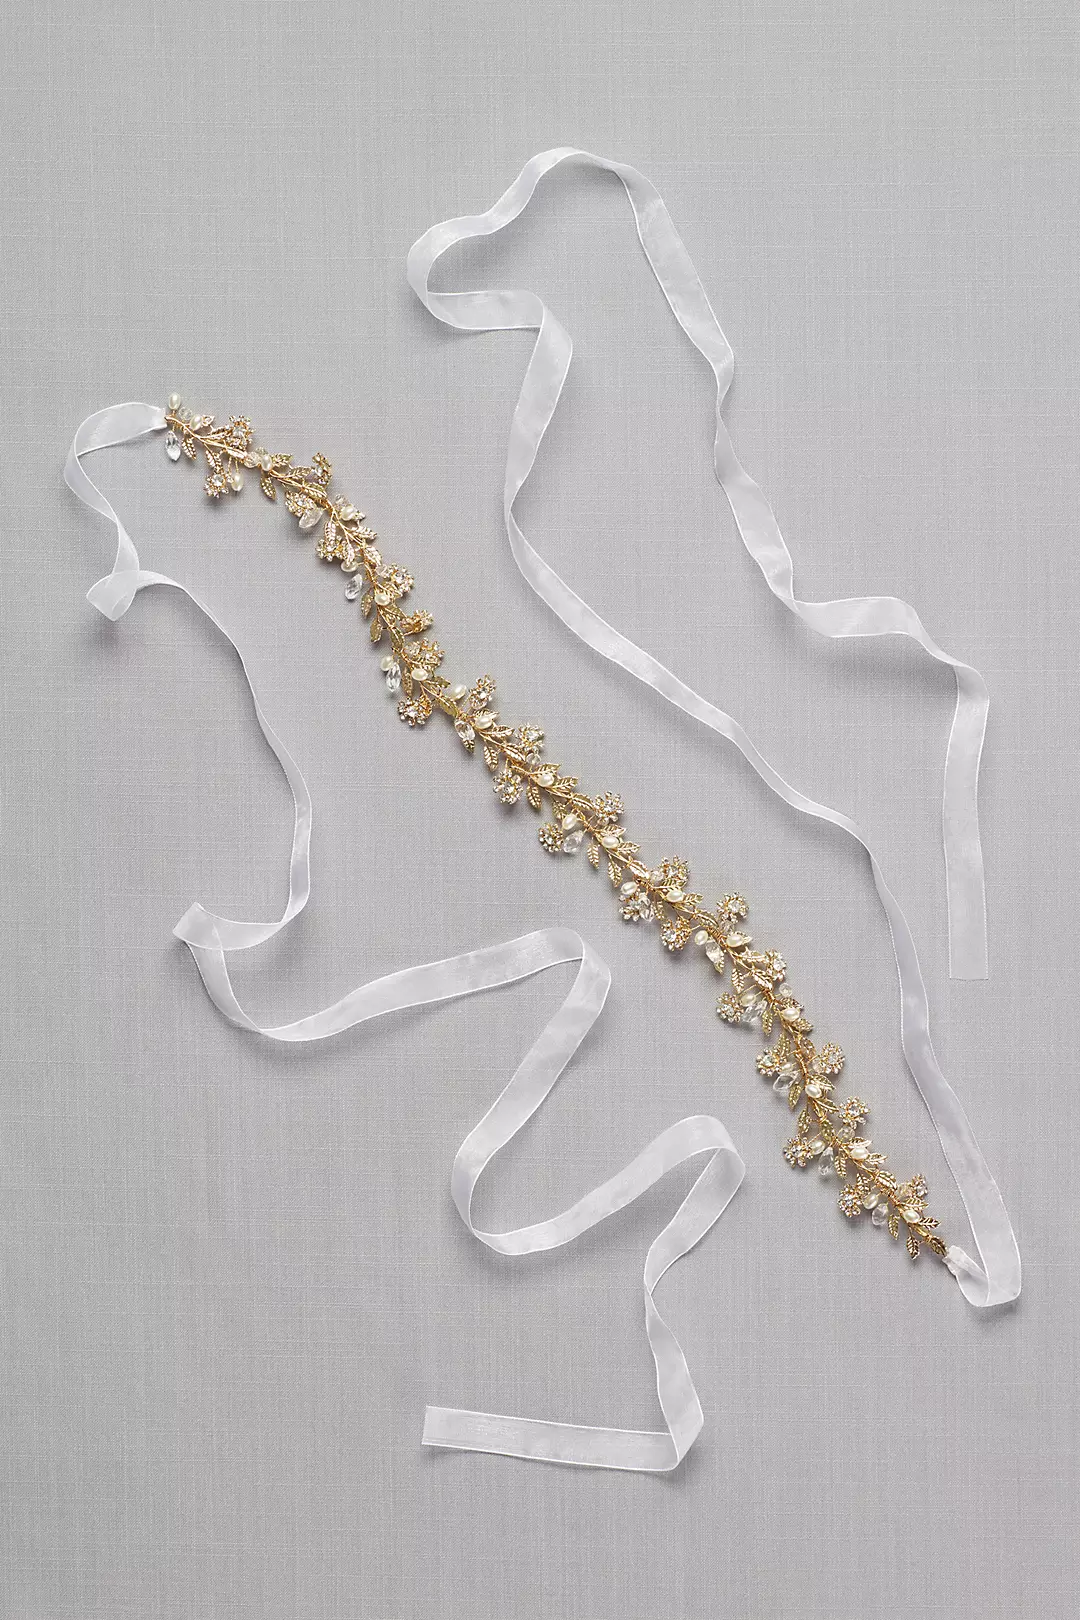 Golden Vine Sash with Crystals and Pearls Image